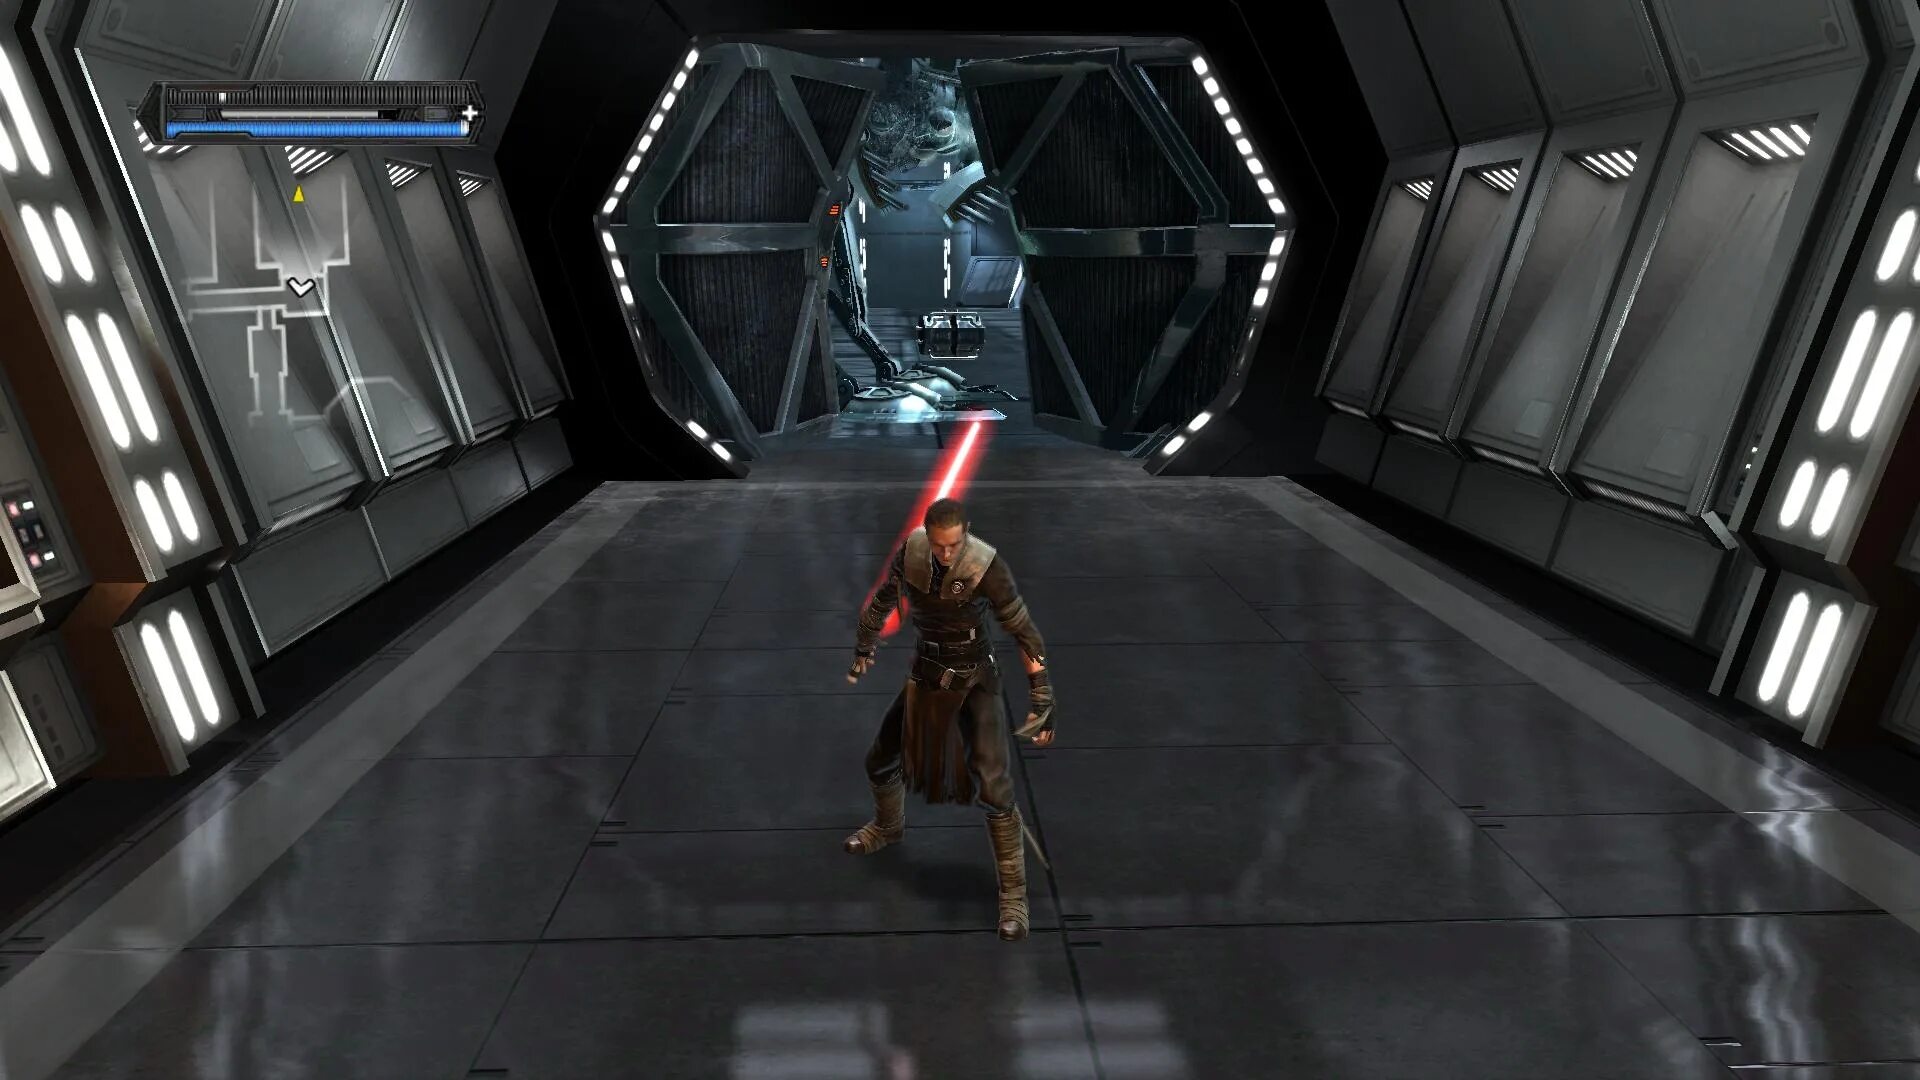 The Force unleashed Ultimate Sith Edition. Star Wars игра 2008. Игра Star Wars 1991.